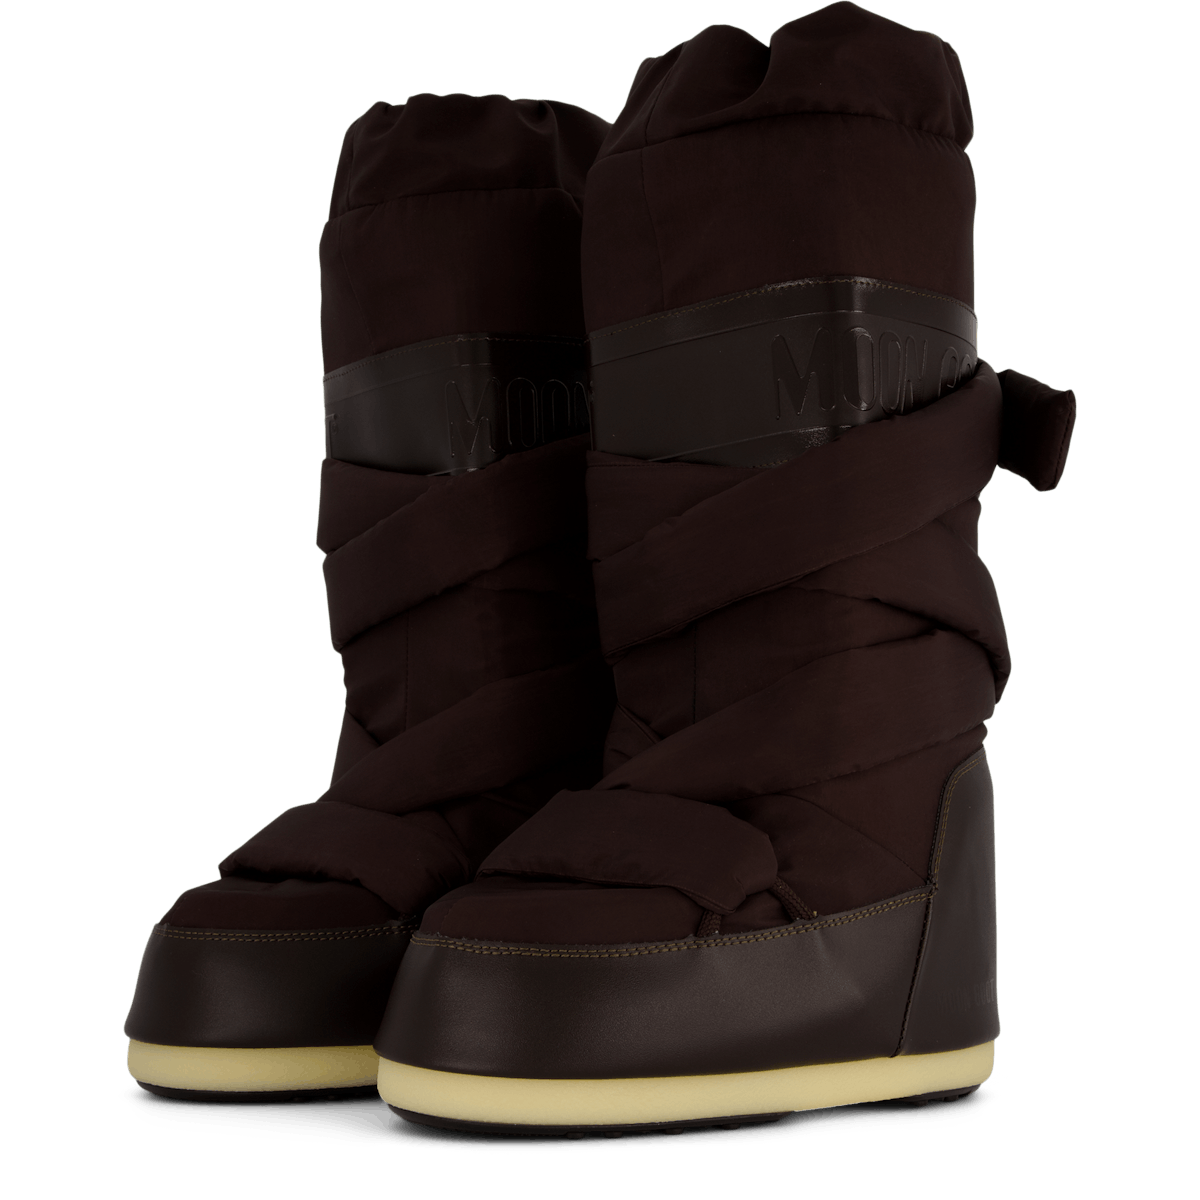 Mb Moon Boot Icon Puffy Lace Dark